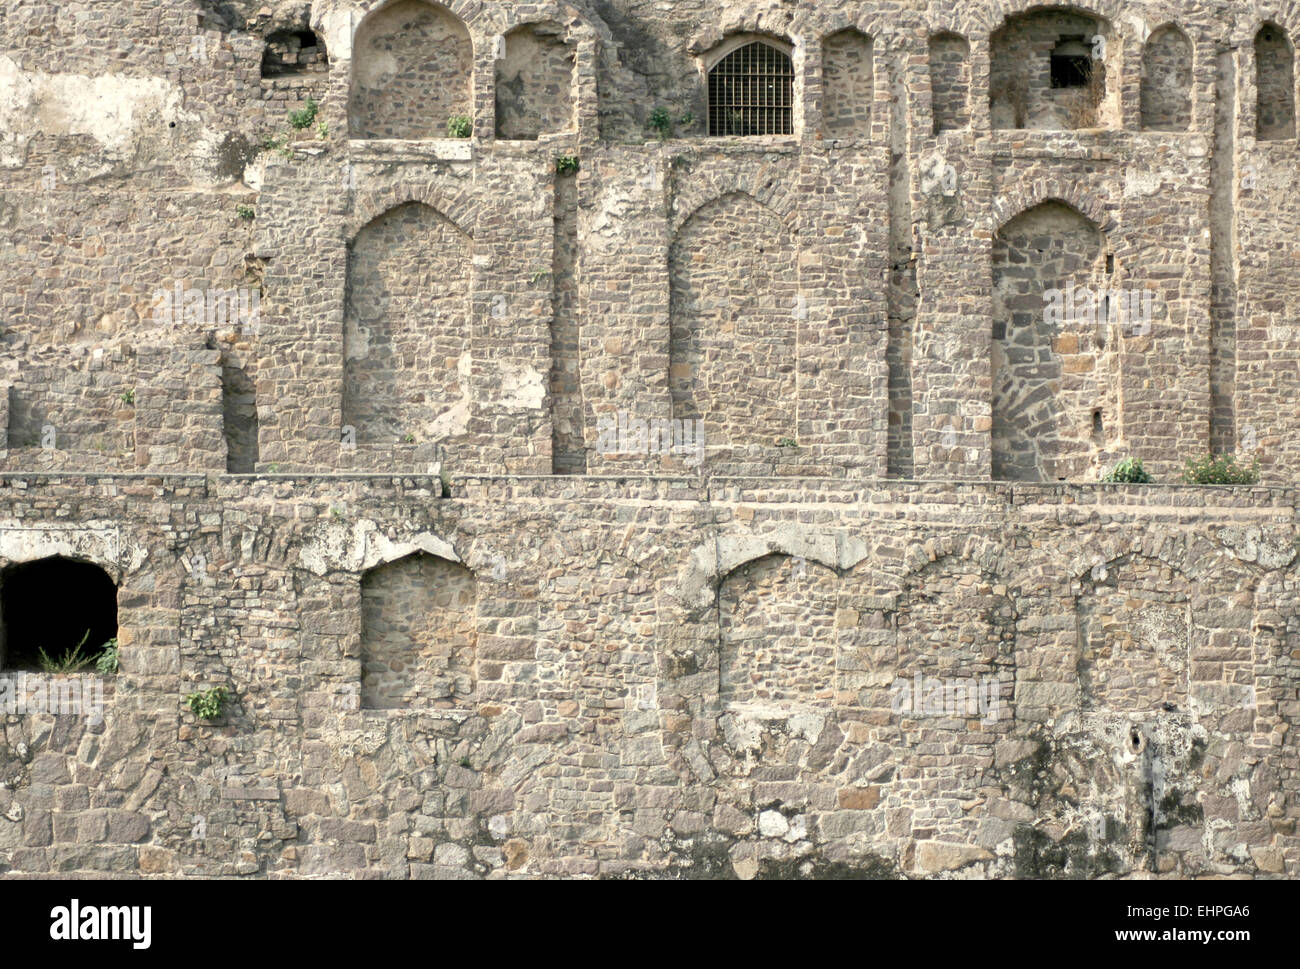 Architectural details of 400 year old ruined Golconda fort,Hyderabad,India Stock Photo